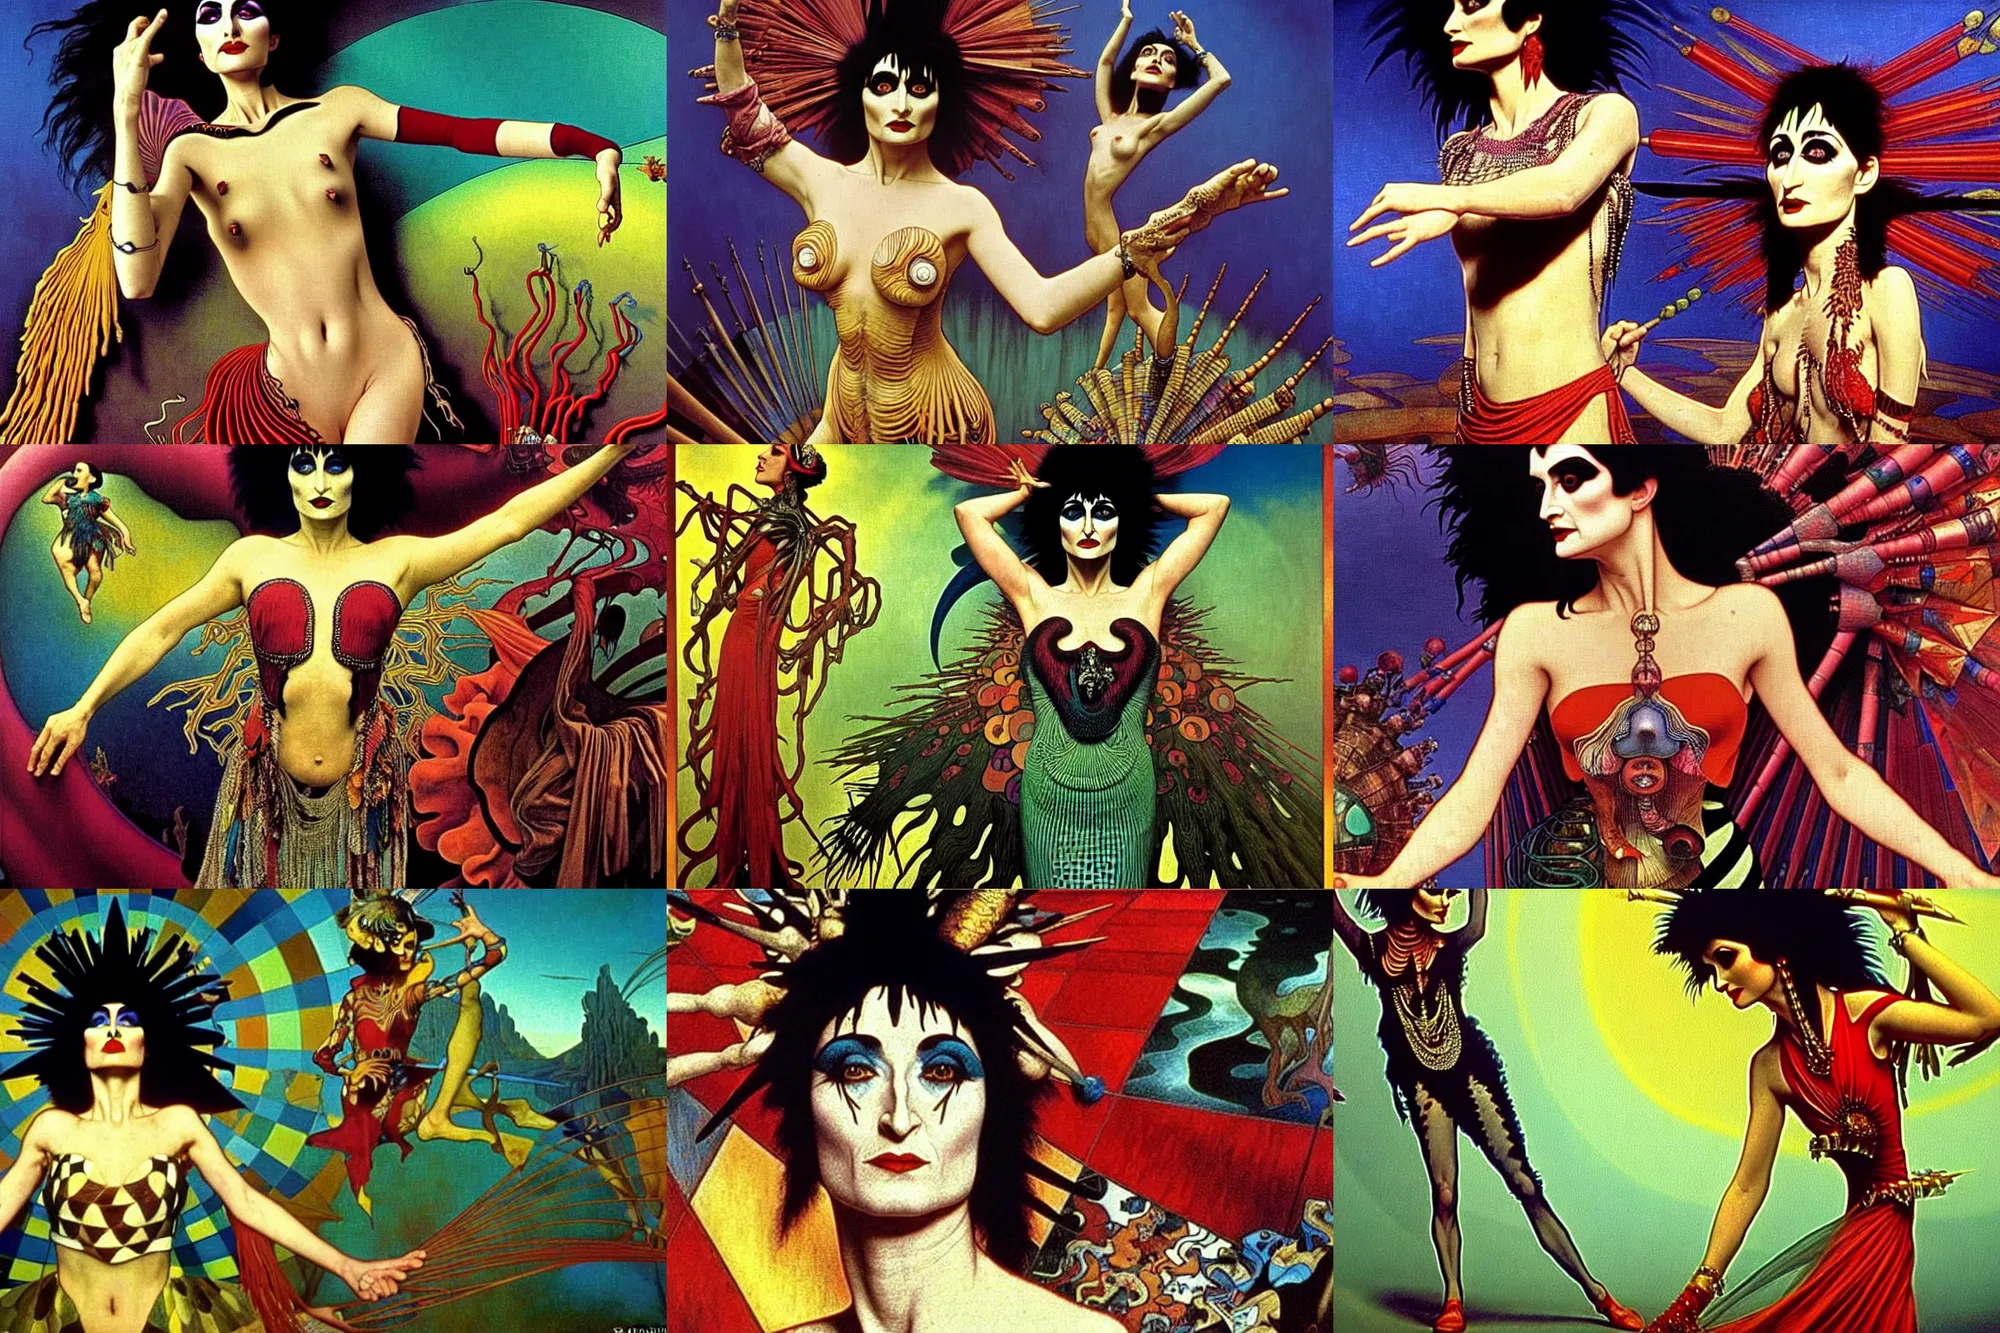 Prompt: realistic detailed portrait movie shot of a siouxsie dancing on a giant checkerboard by denis villeneuve, jean deville, amano, yves tanguy, ernst haeckel, alphonse mucha, max ernst, caravaggio, roger dean, masterpiece, rich moody colours